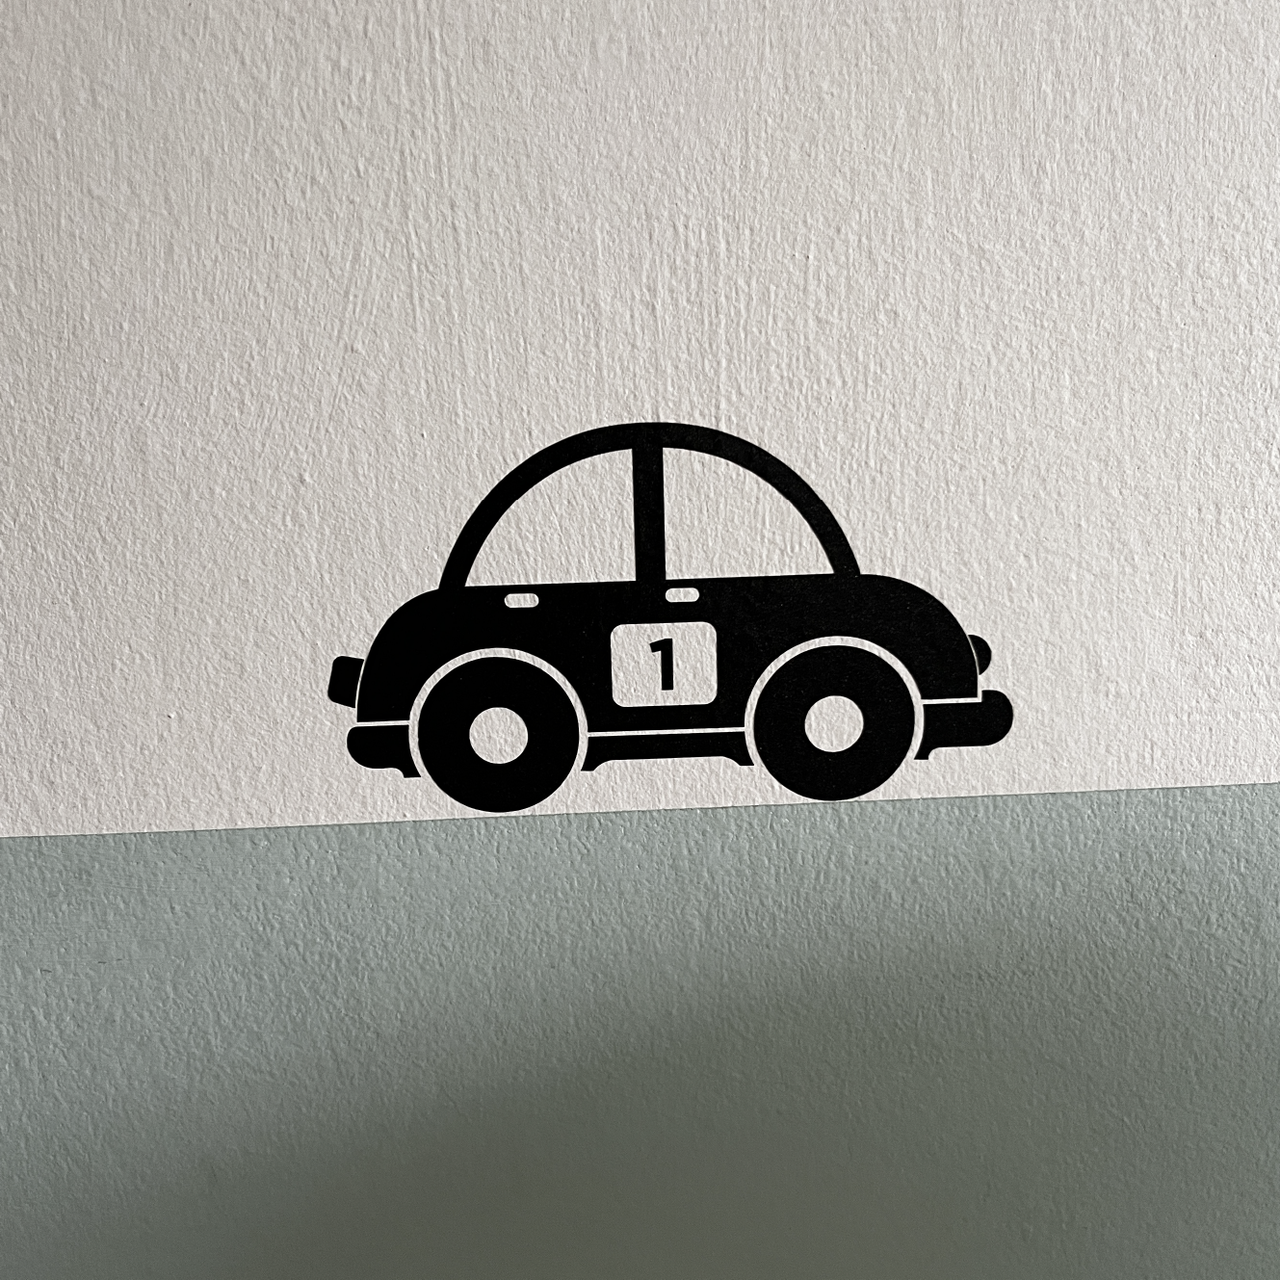 Kids Numbered Car Wall Decal Set